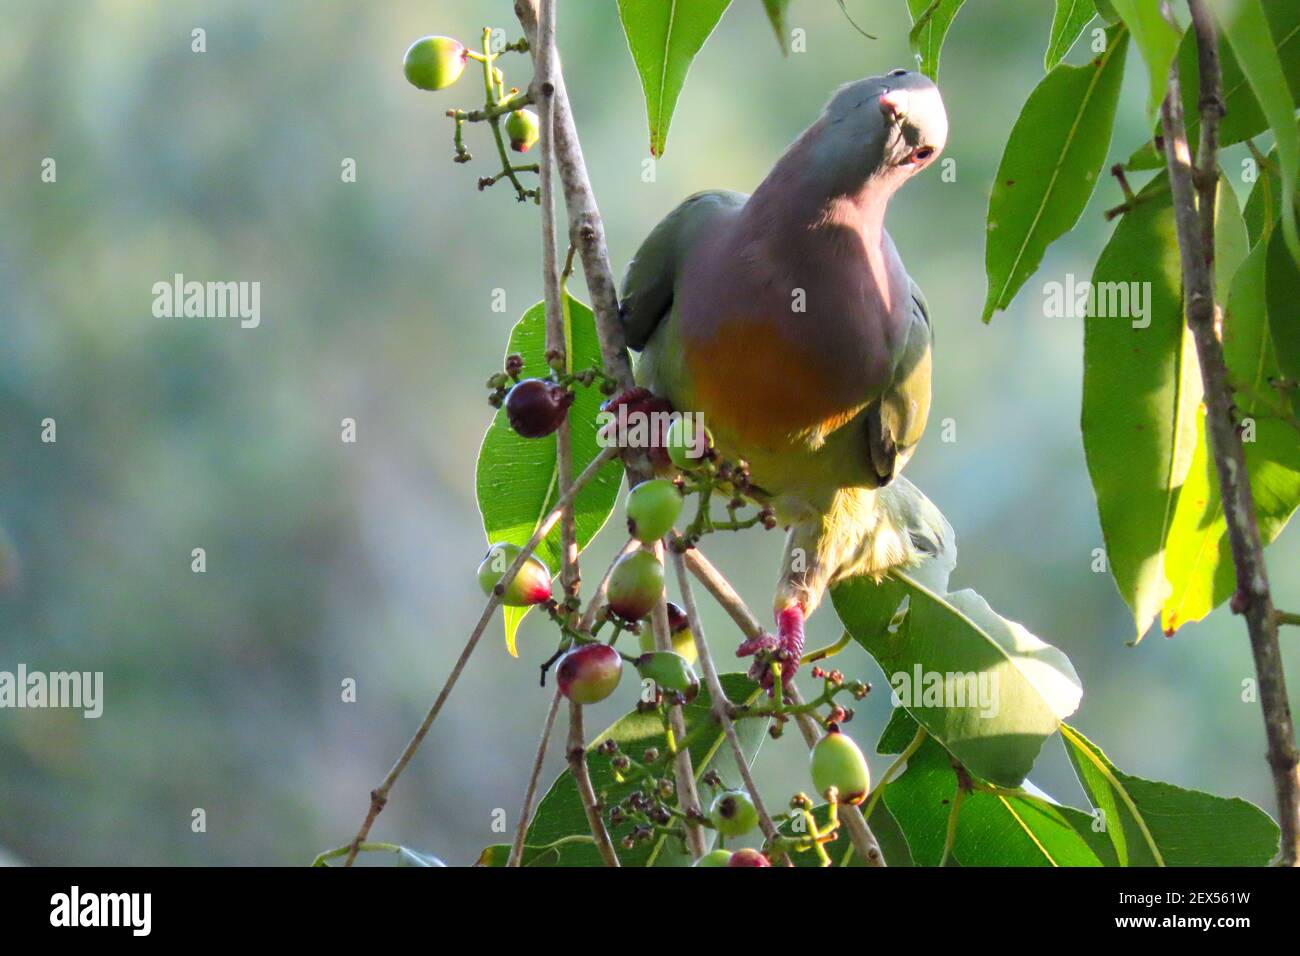 Pink-necked green pigeon in Singapore rain forest. Stock Photo